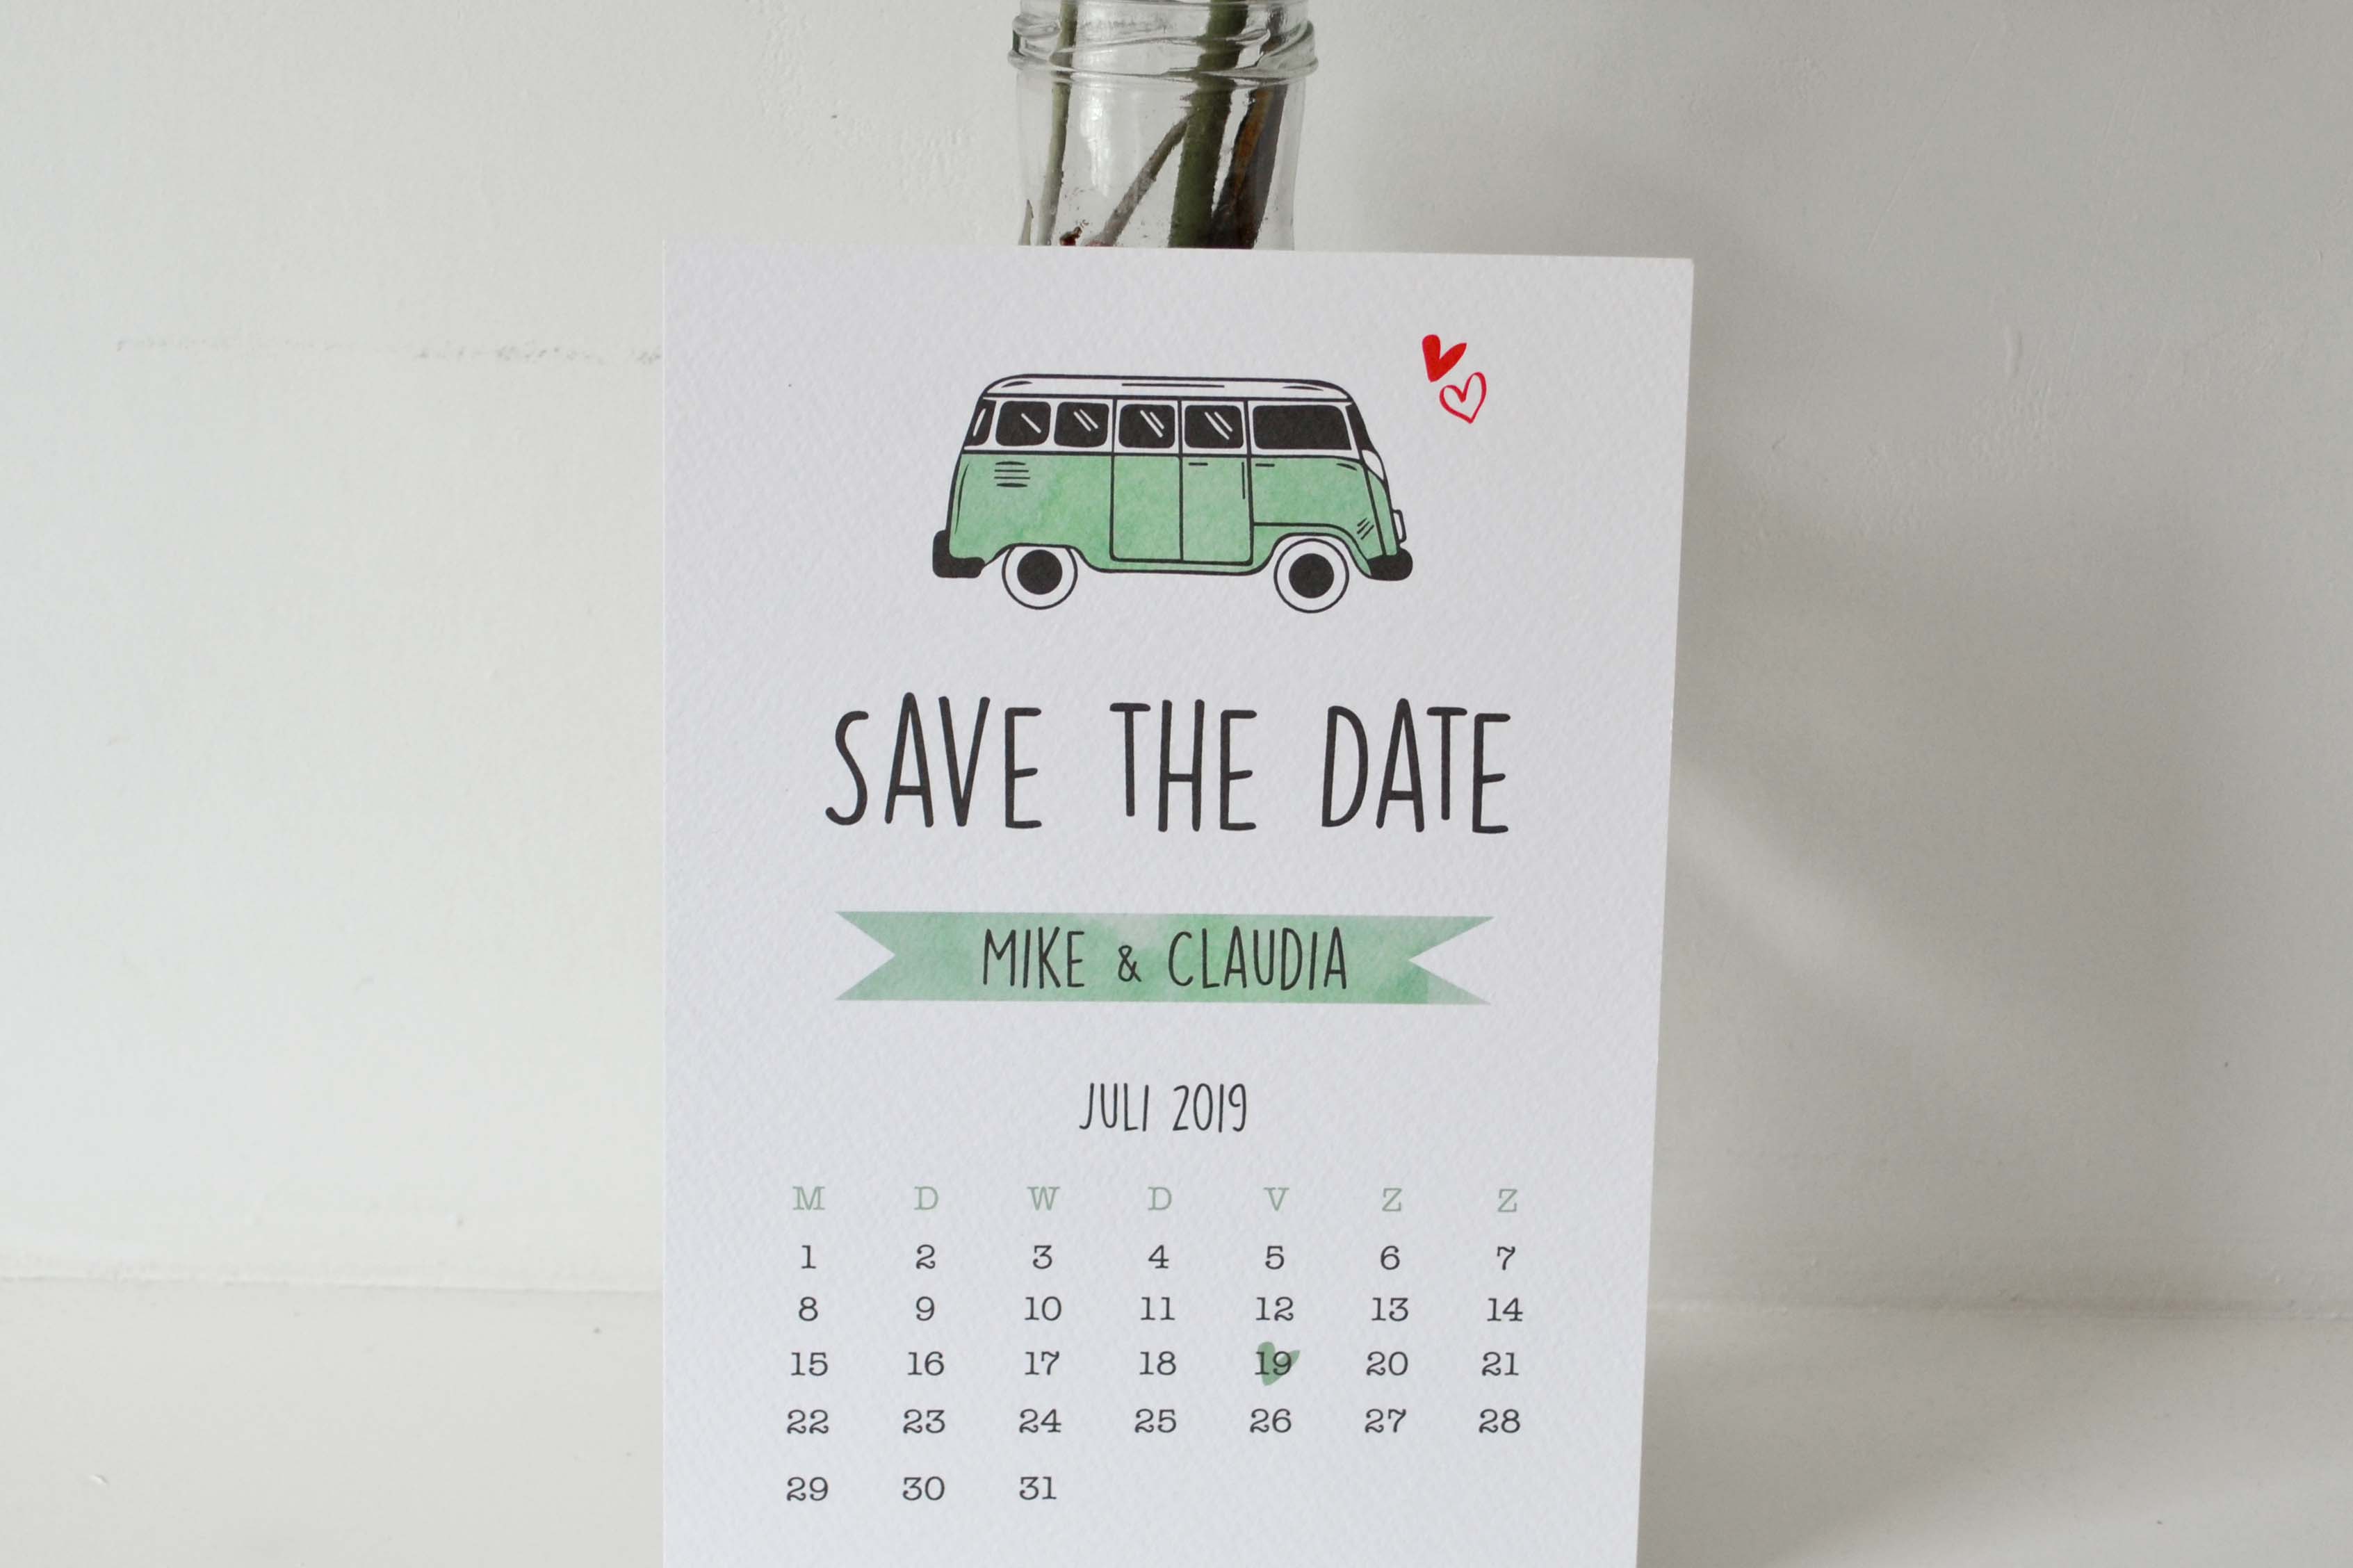 Save the date kaart Mike & Claudia